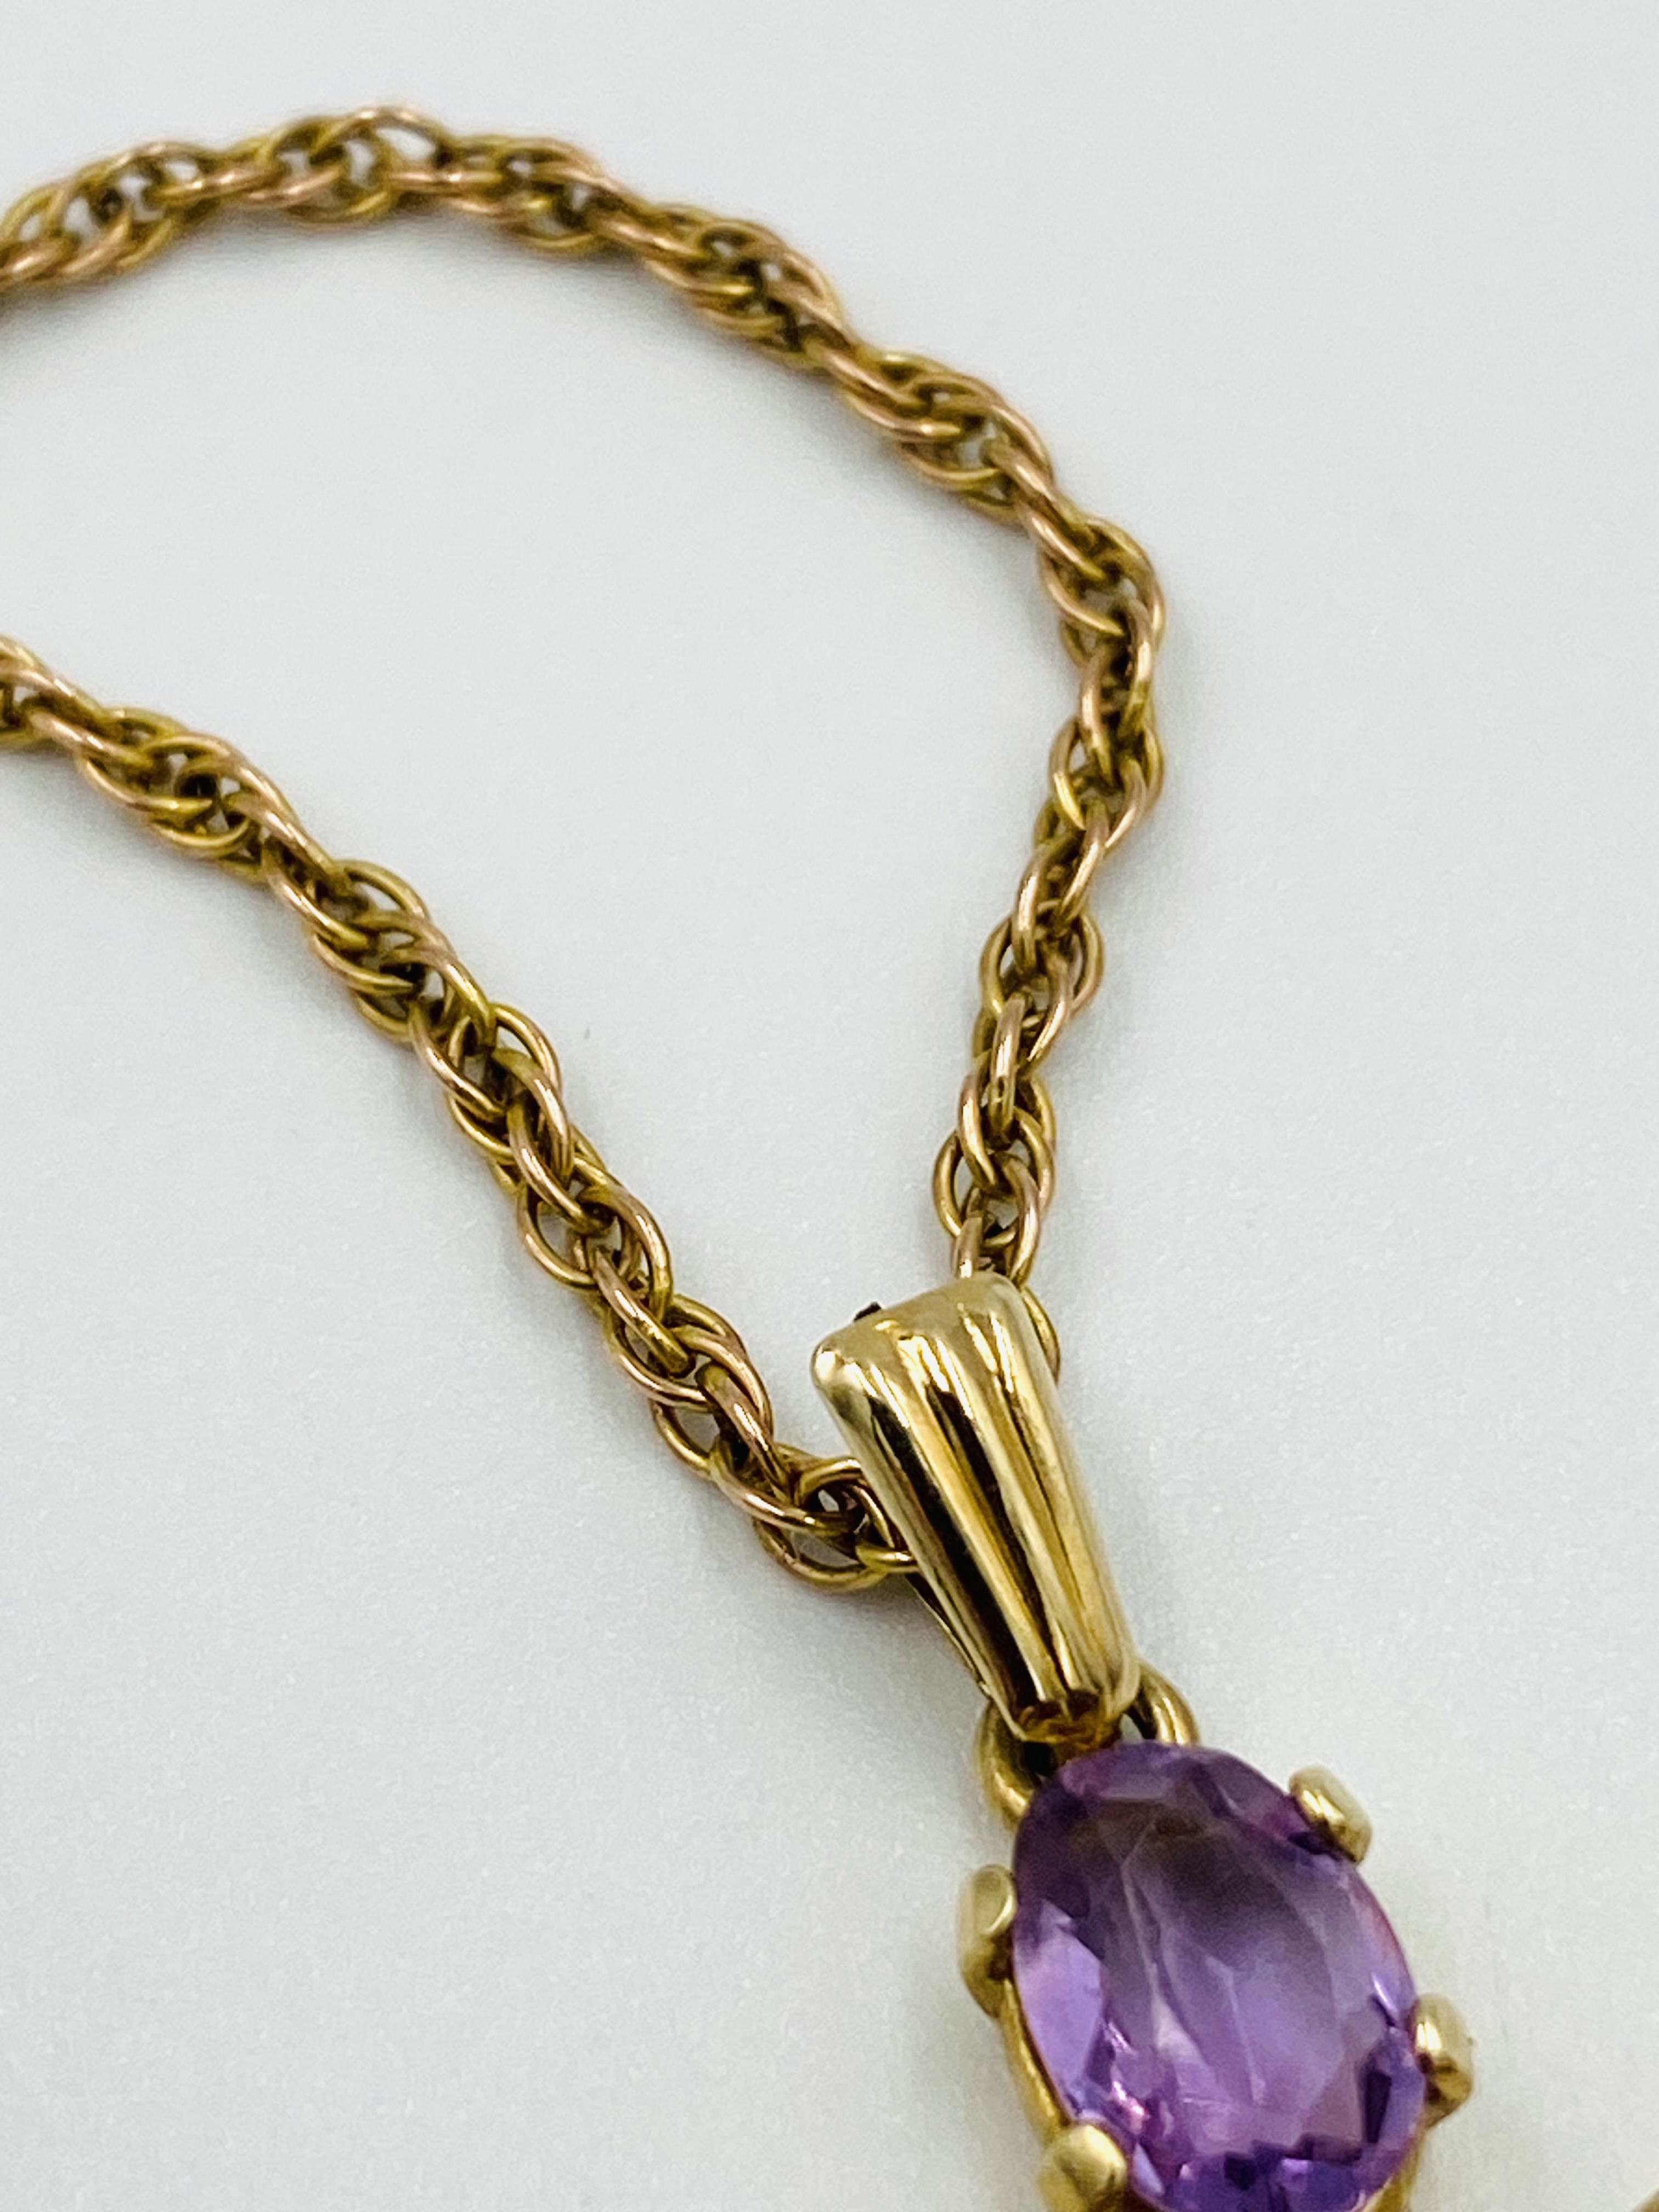 9ct gold cross set with amethysts, on a 9ct gold rope chain - Image 2 of 5